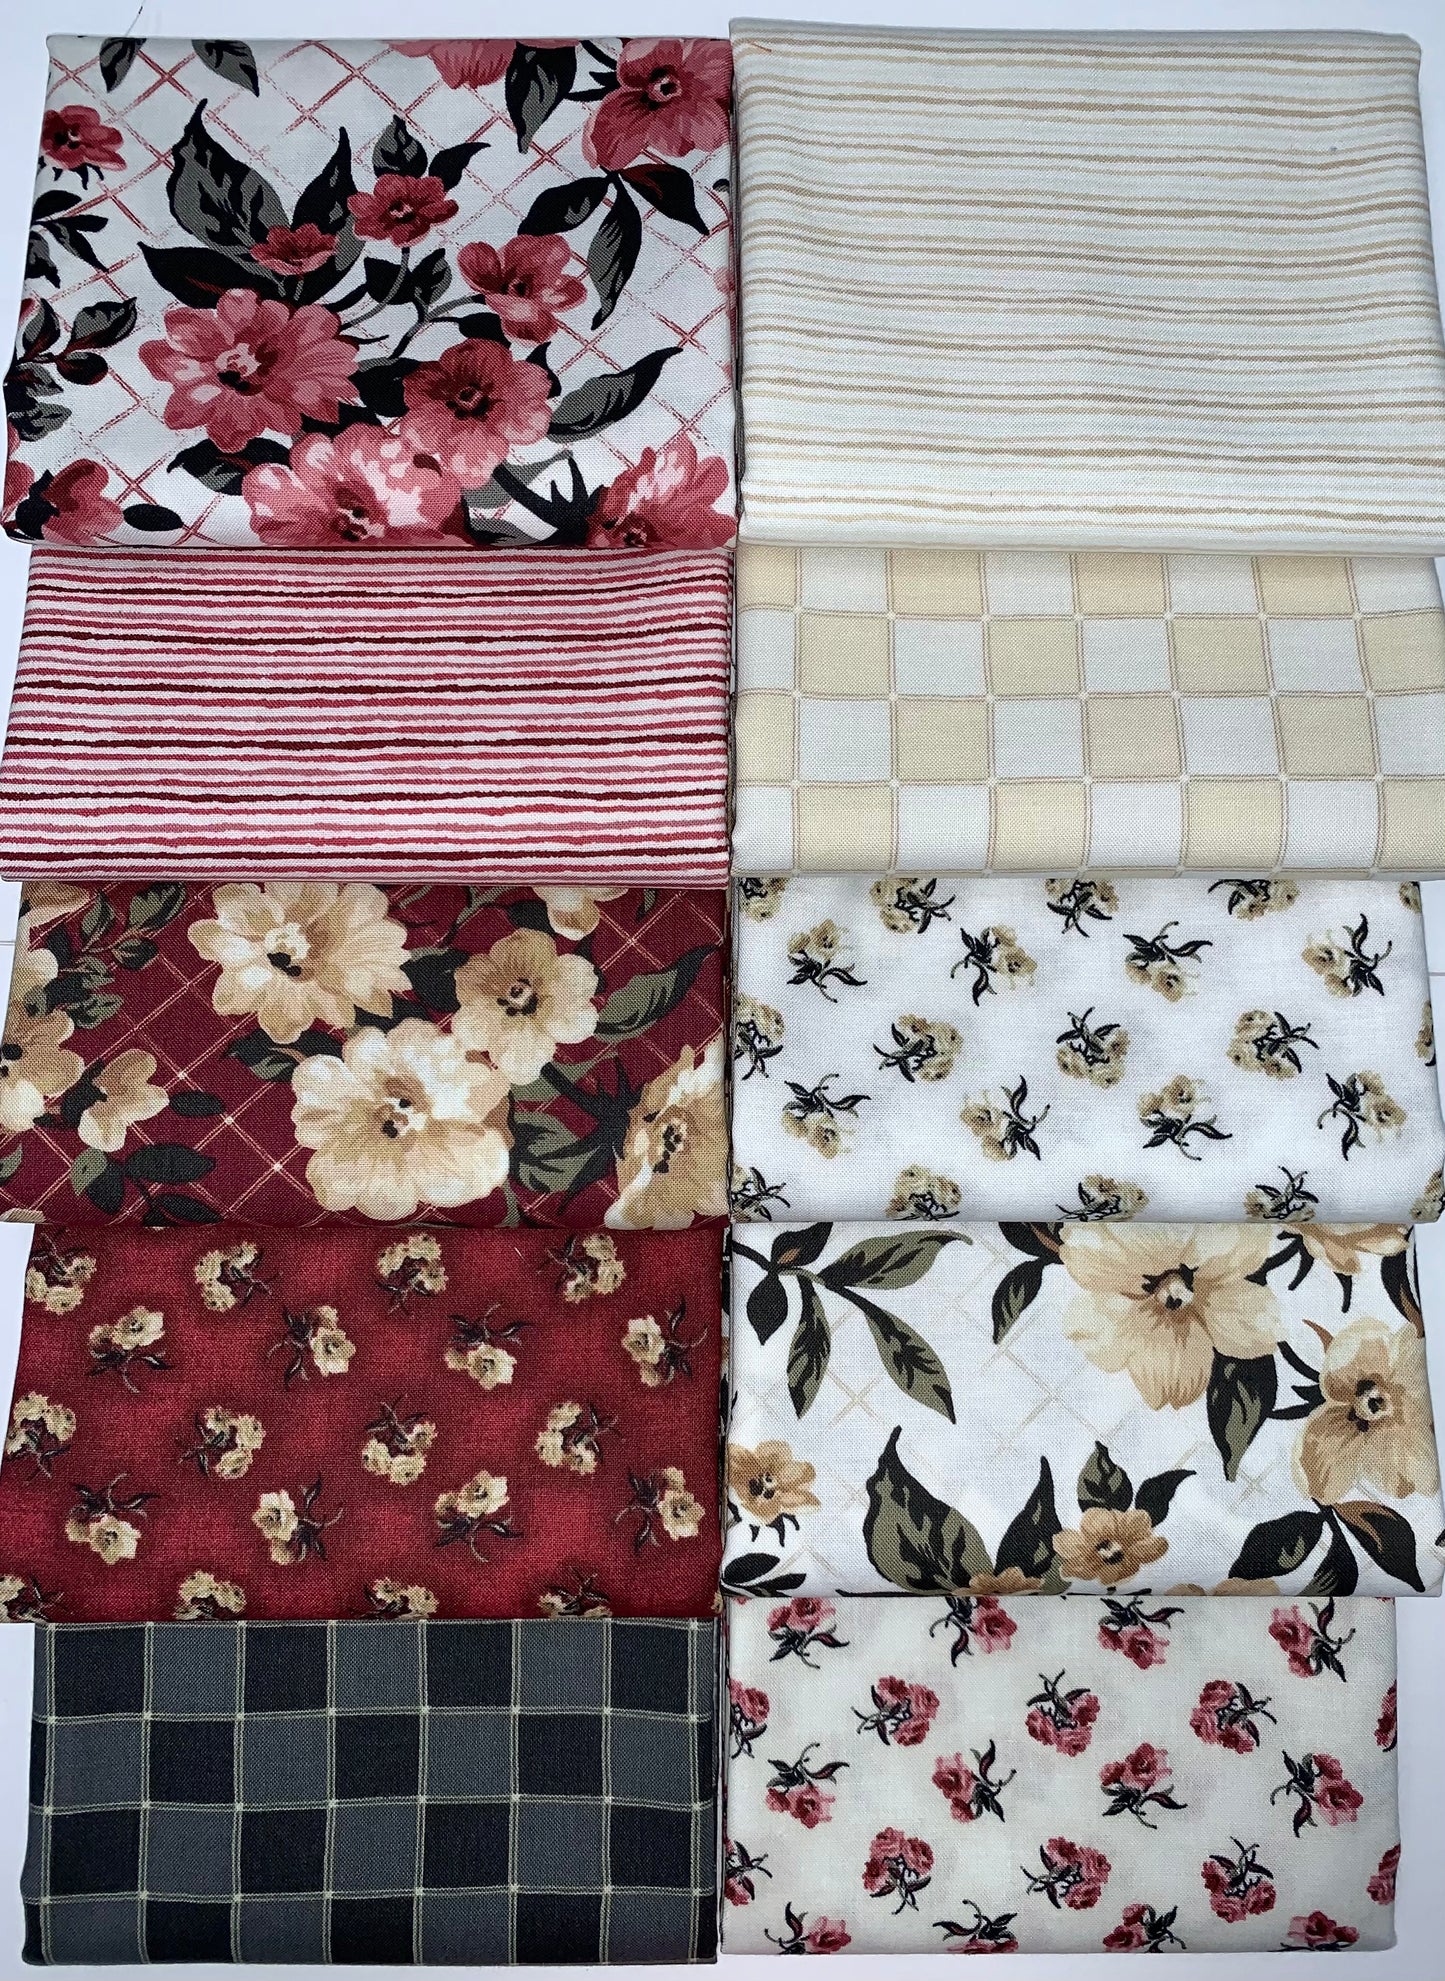 Choice Gallery "Bri's Home Collection" Floral Half-yard Bundle - 10 Fabrics, 5 Total Yards